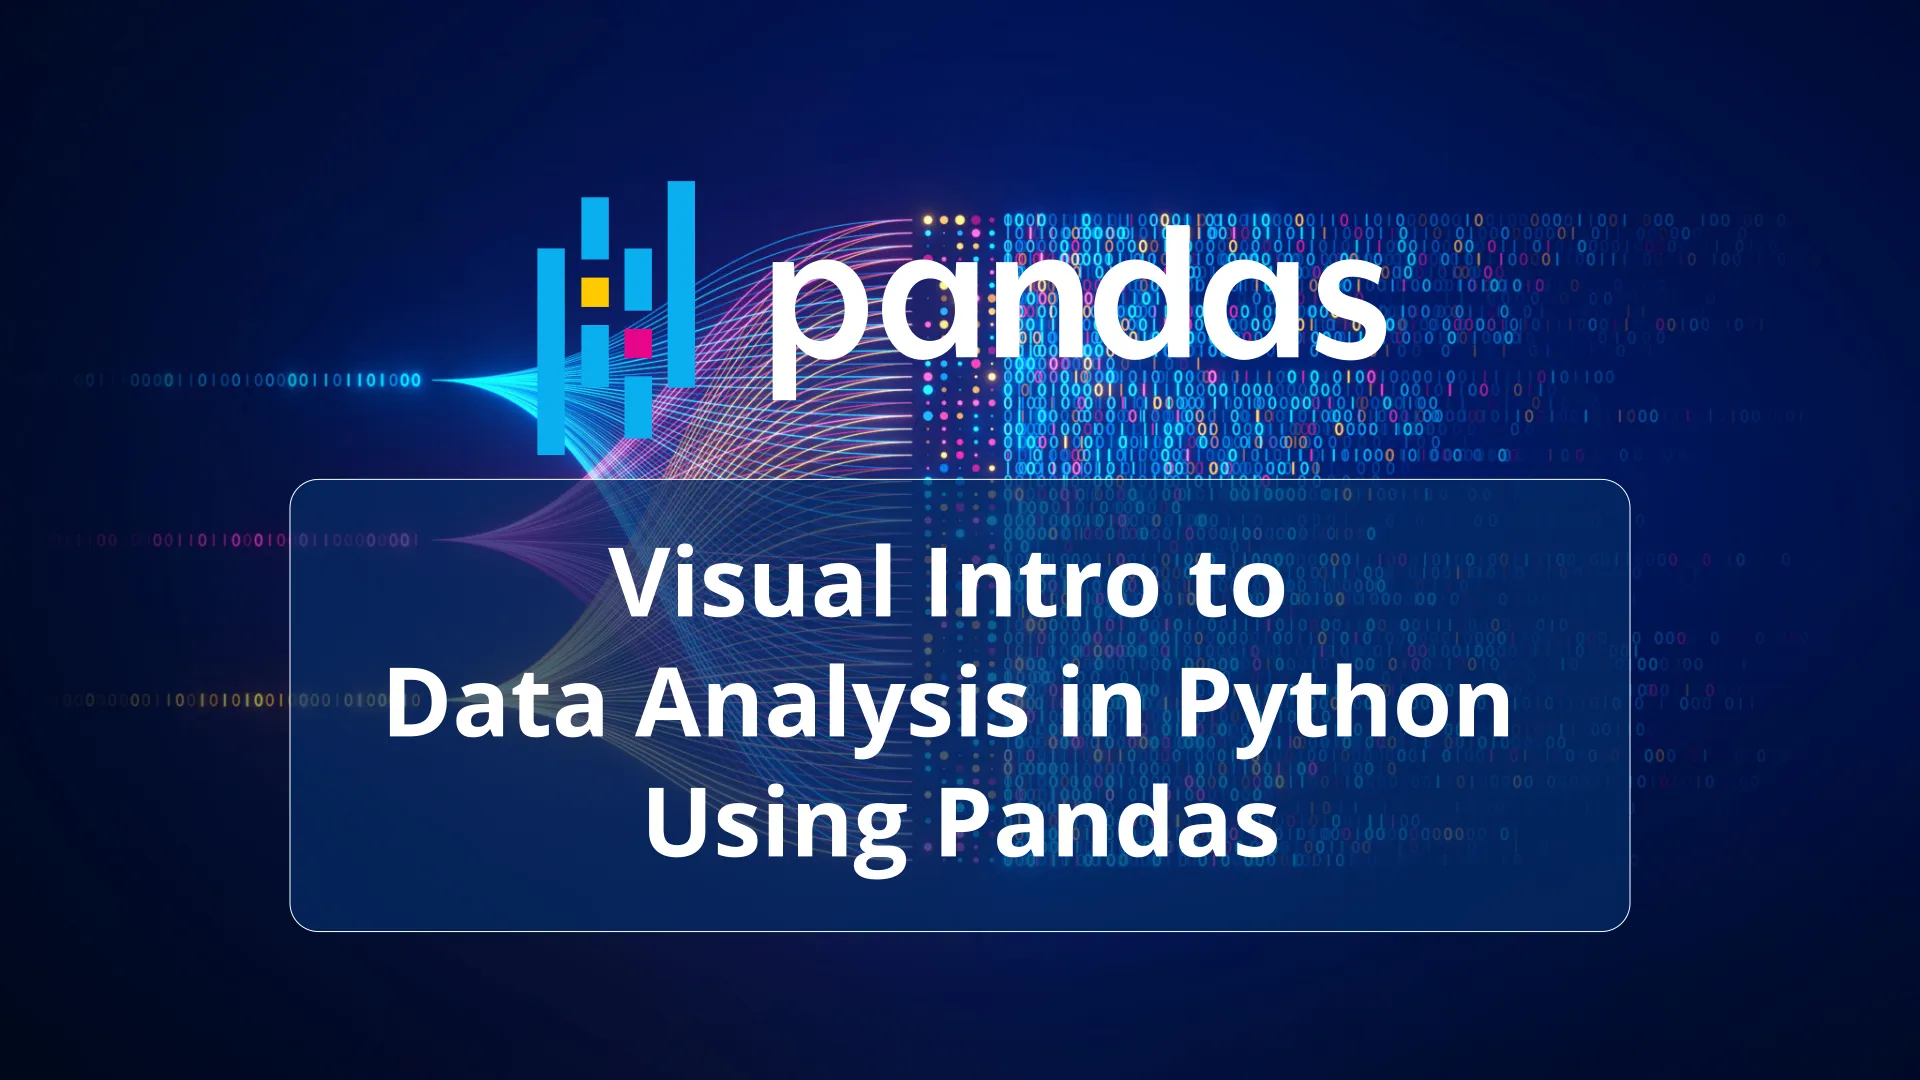 A Gentle Visual Intro to Data Analysis in Python Using Pandas